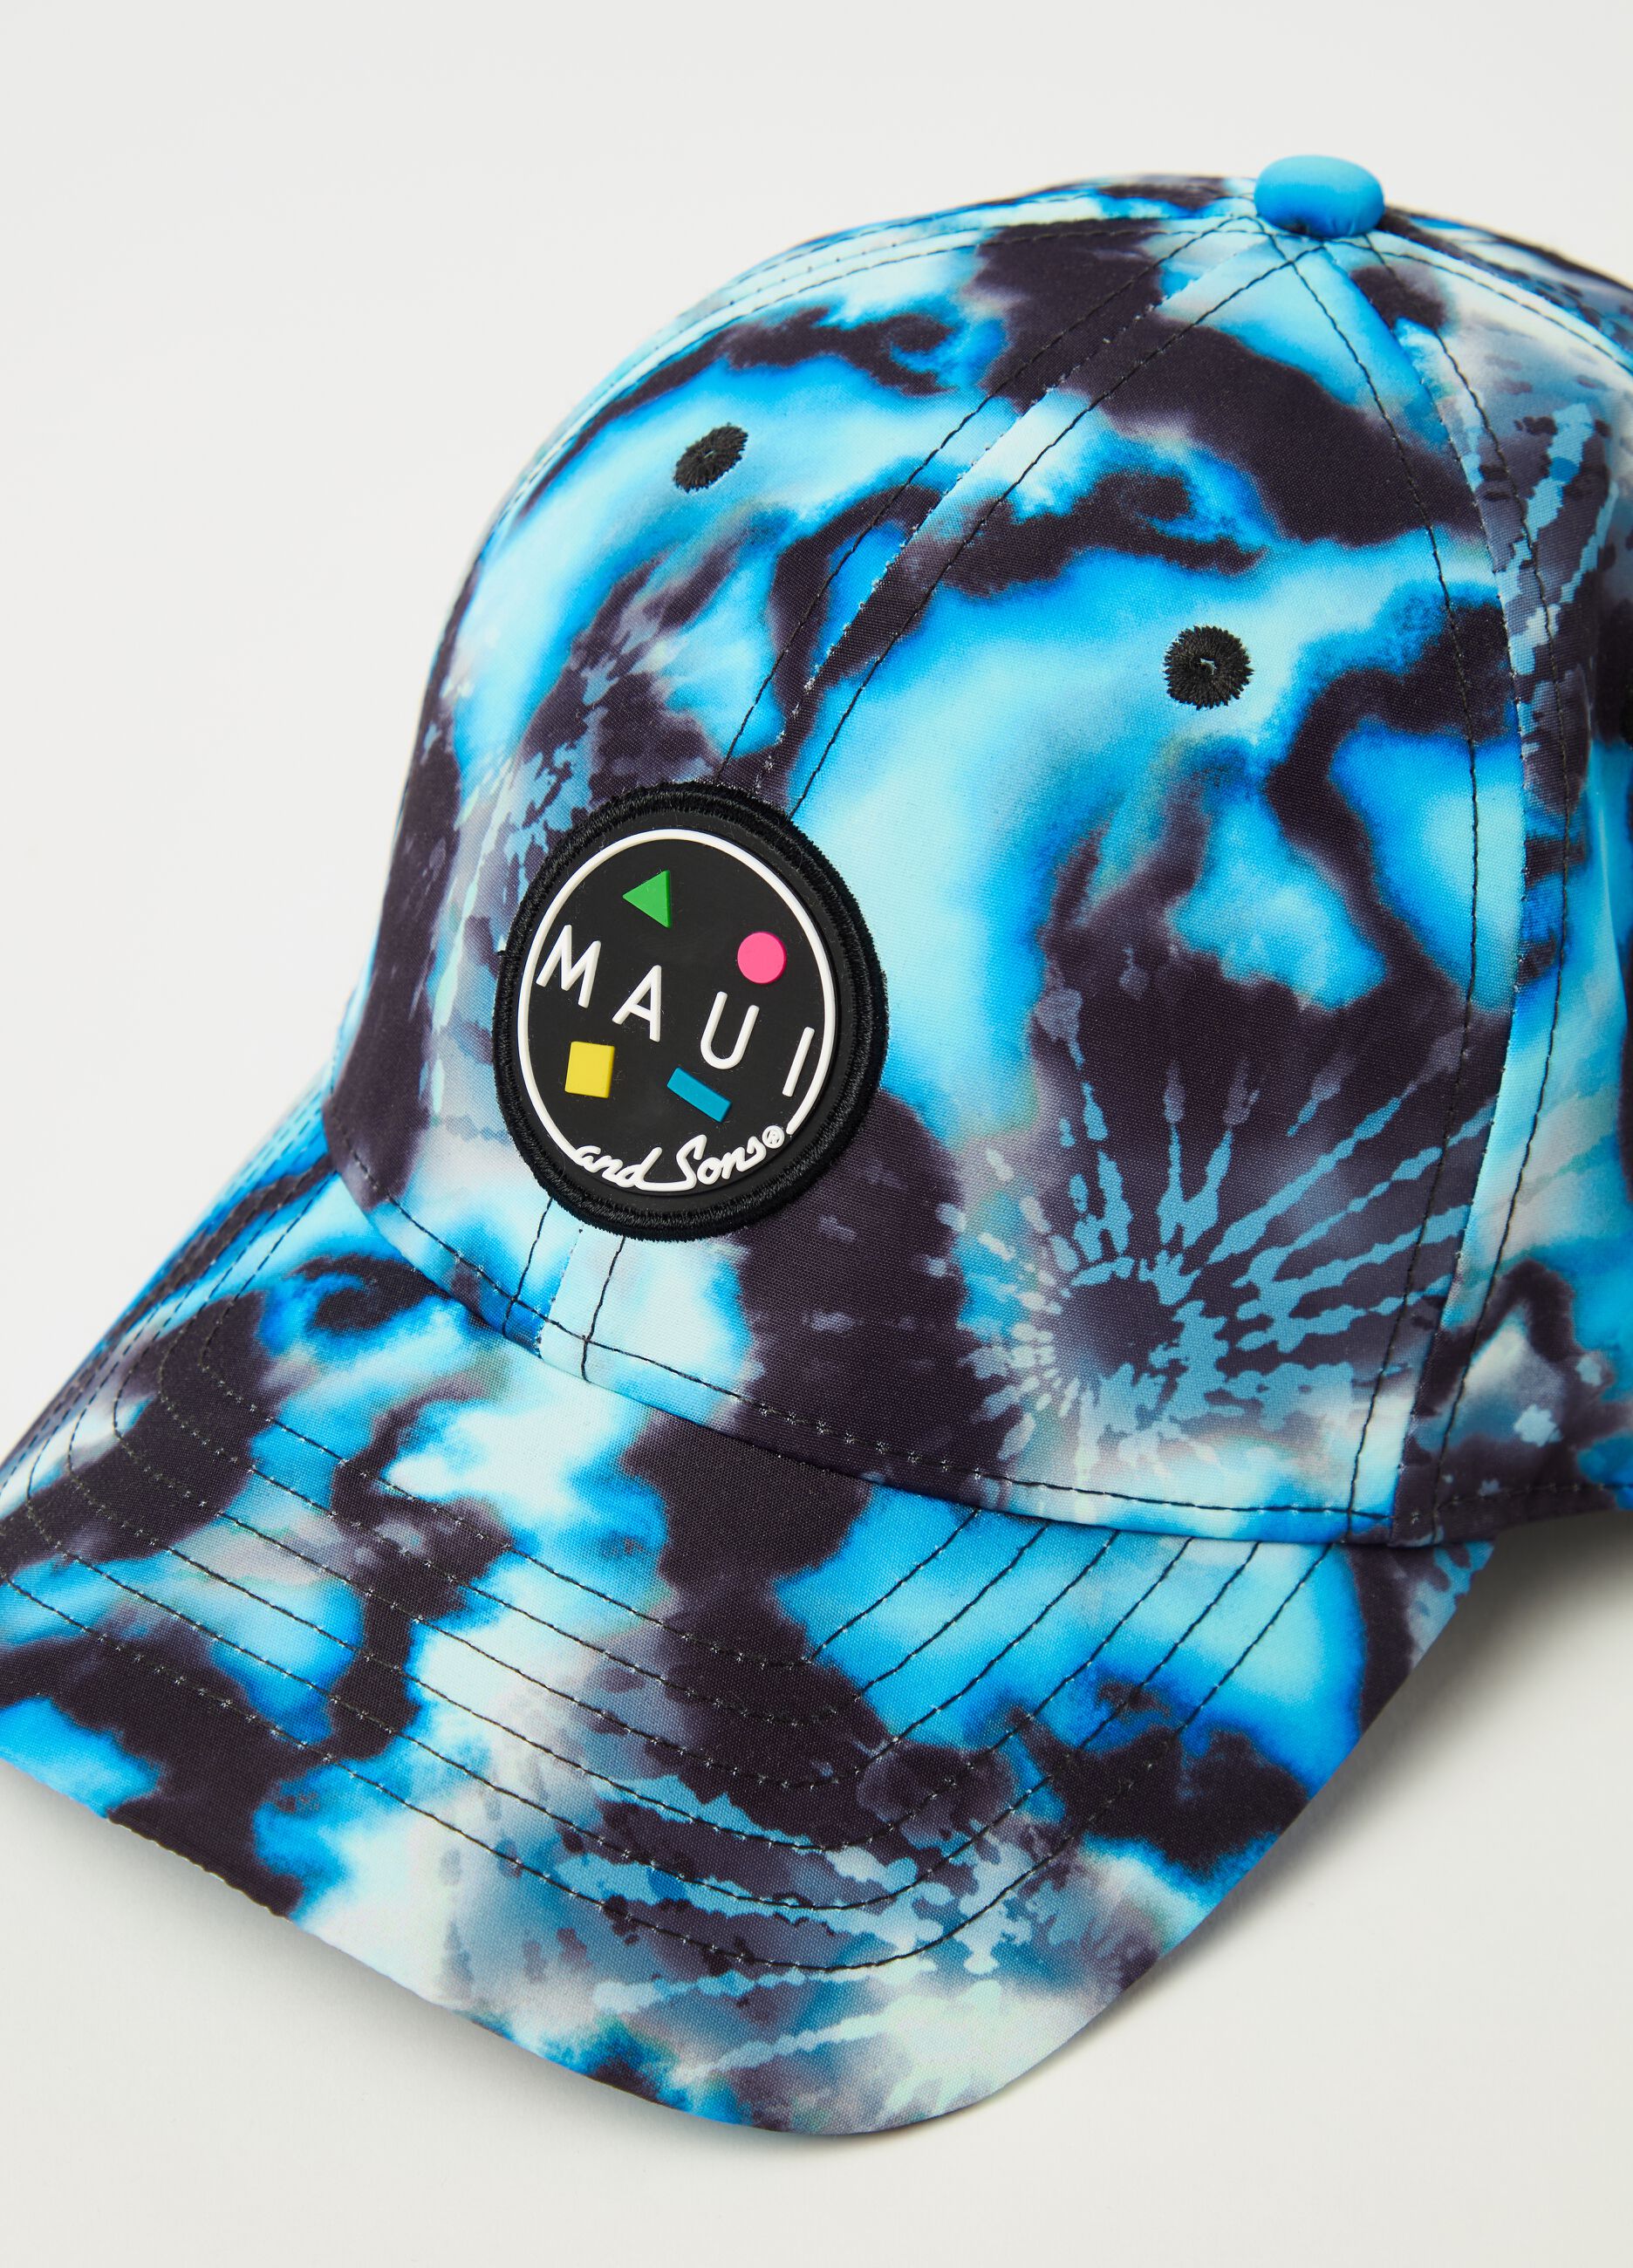 Tie-dye baseball cap with patch with logo